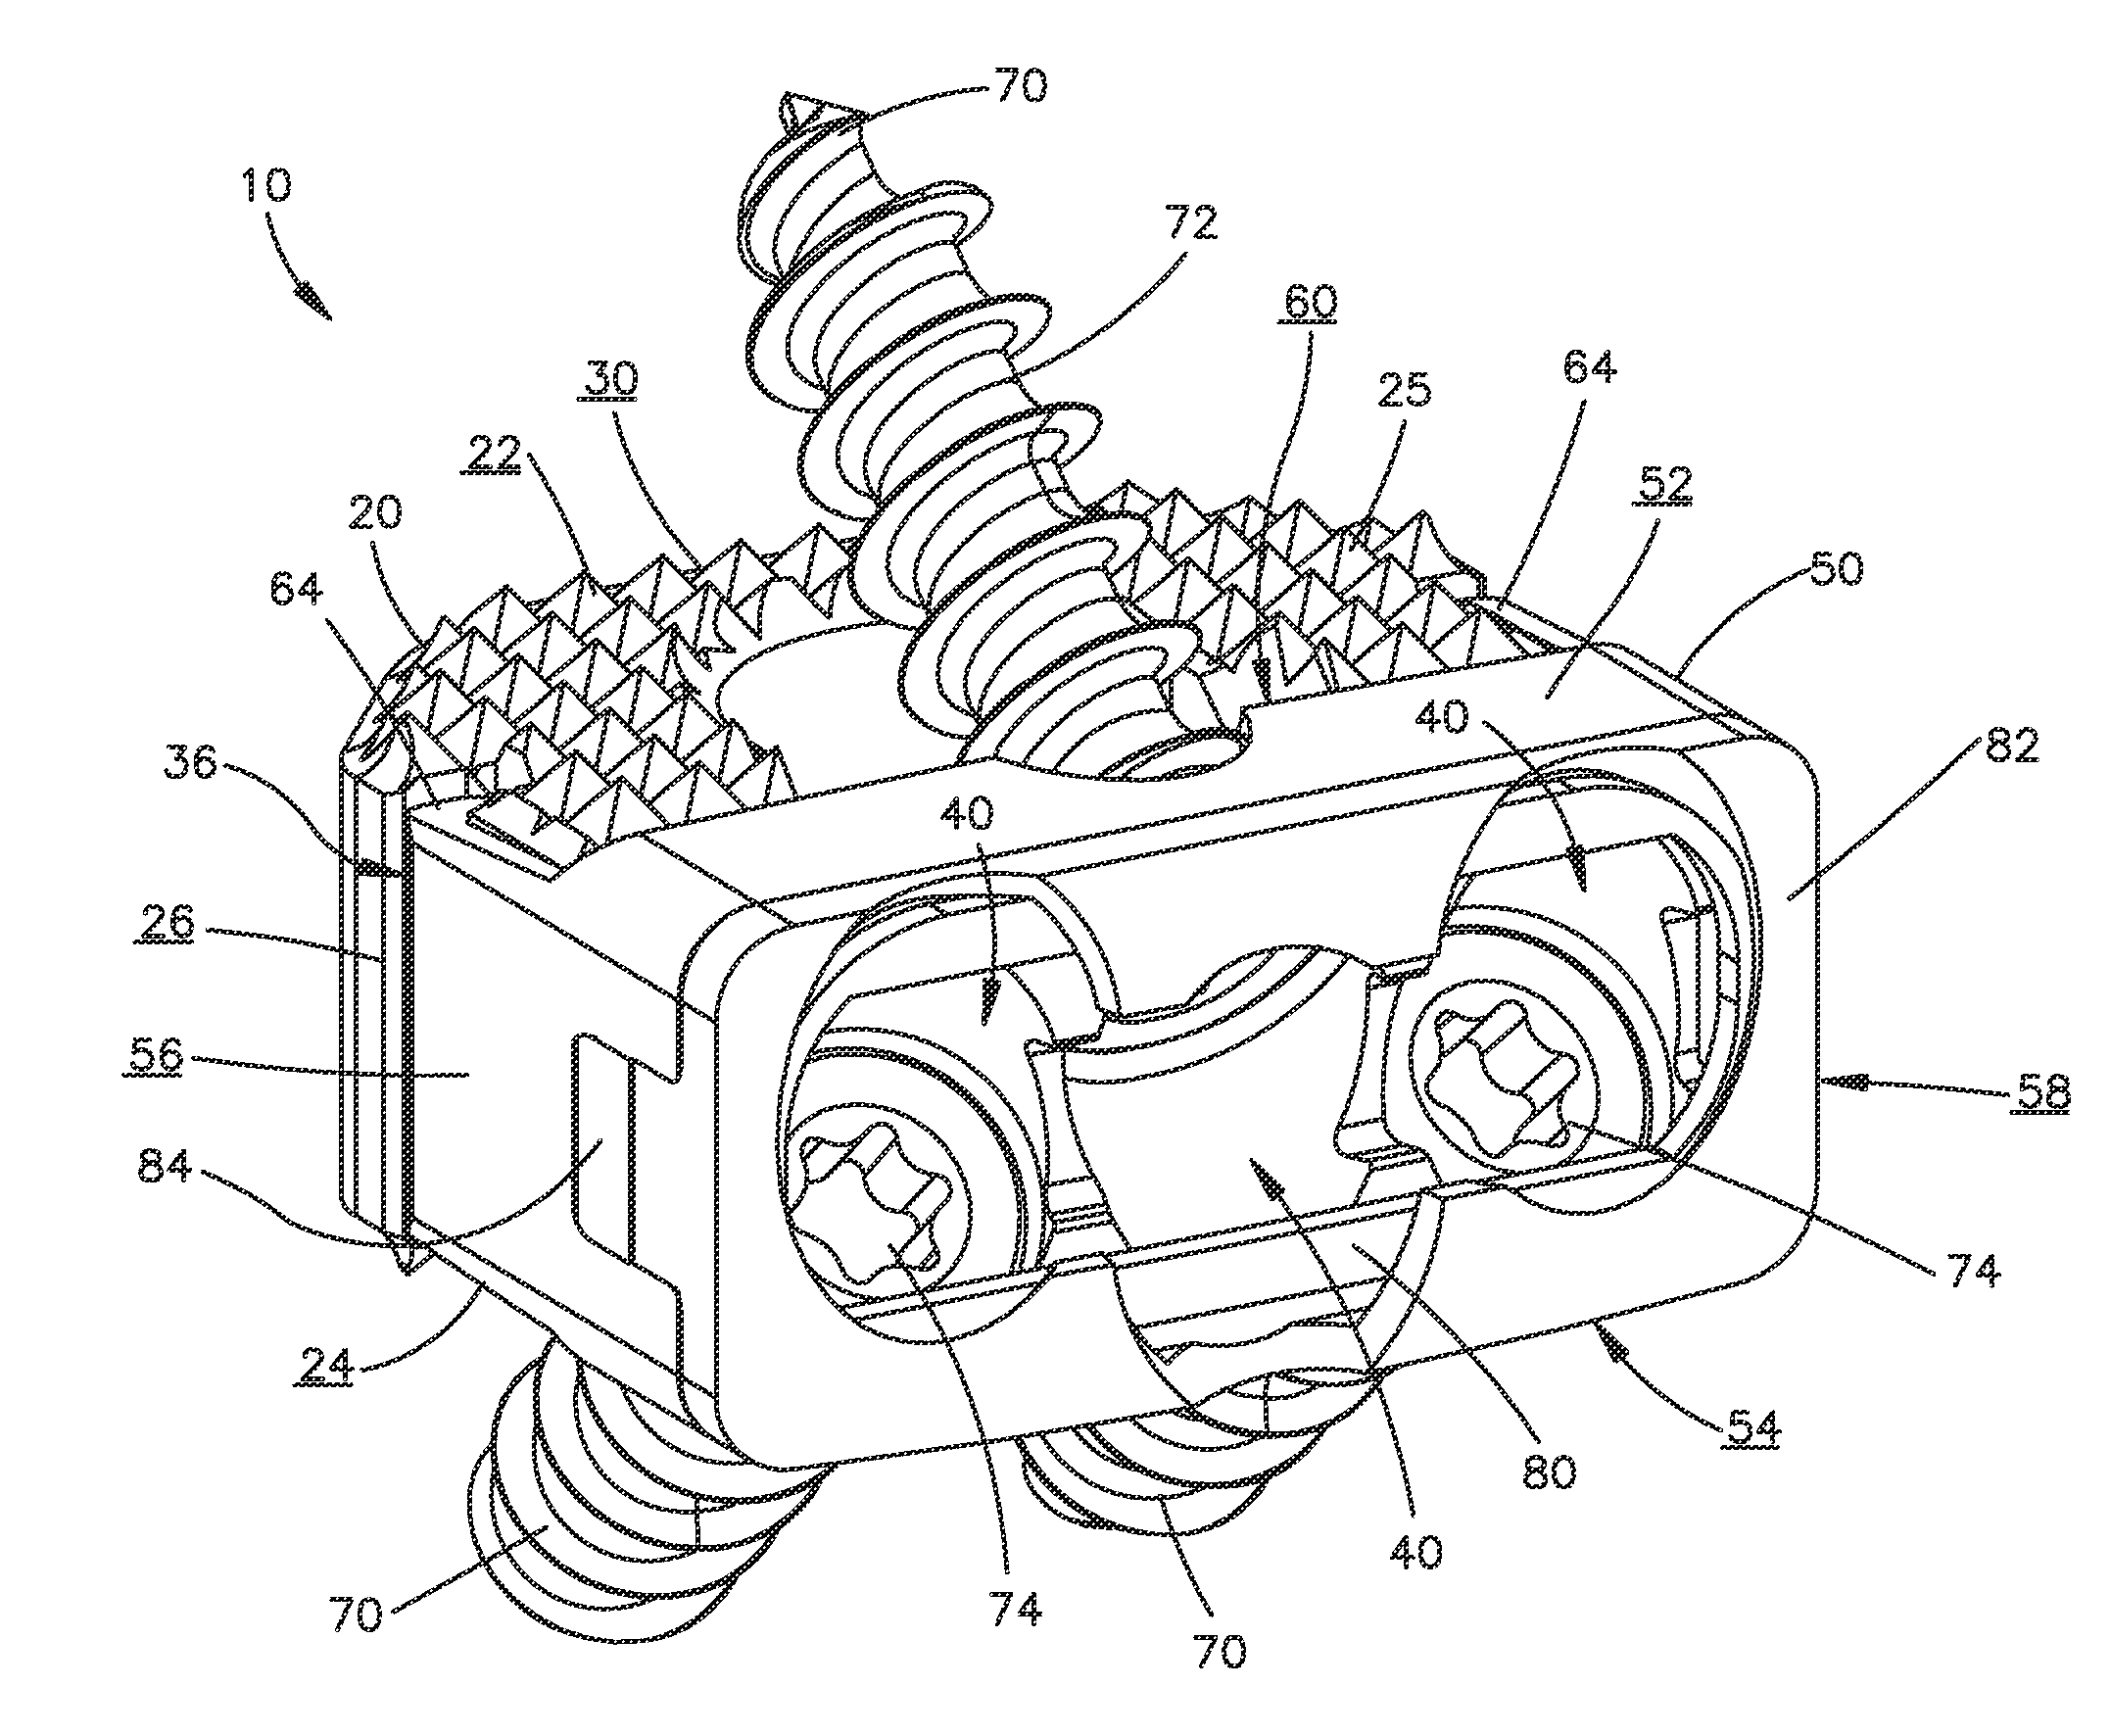 Zero-Profile Interbody Spacer and Coupled Plate Assembly